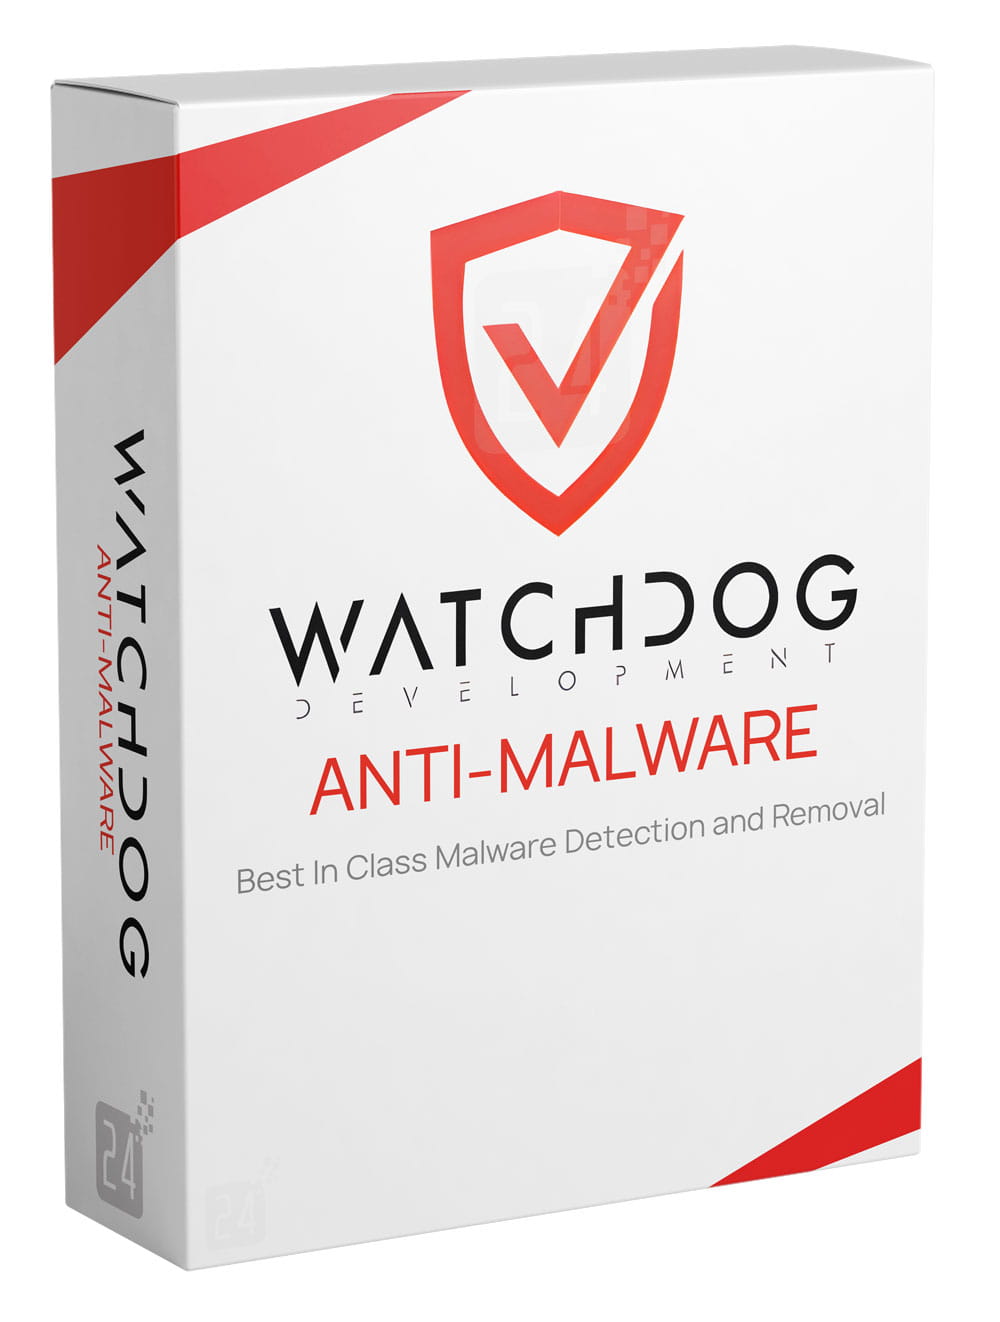 Watchdog Anti-Malware 4.2.82 instal the new version for apple